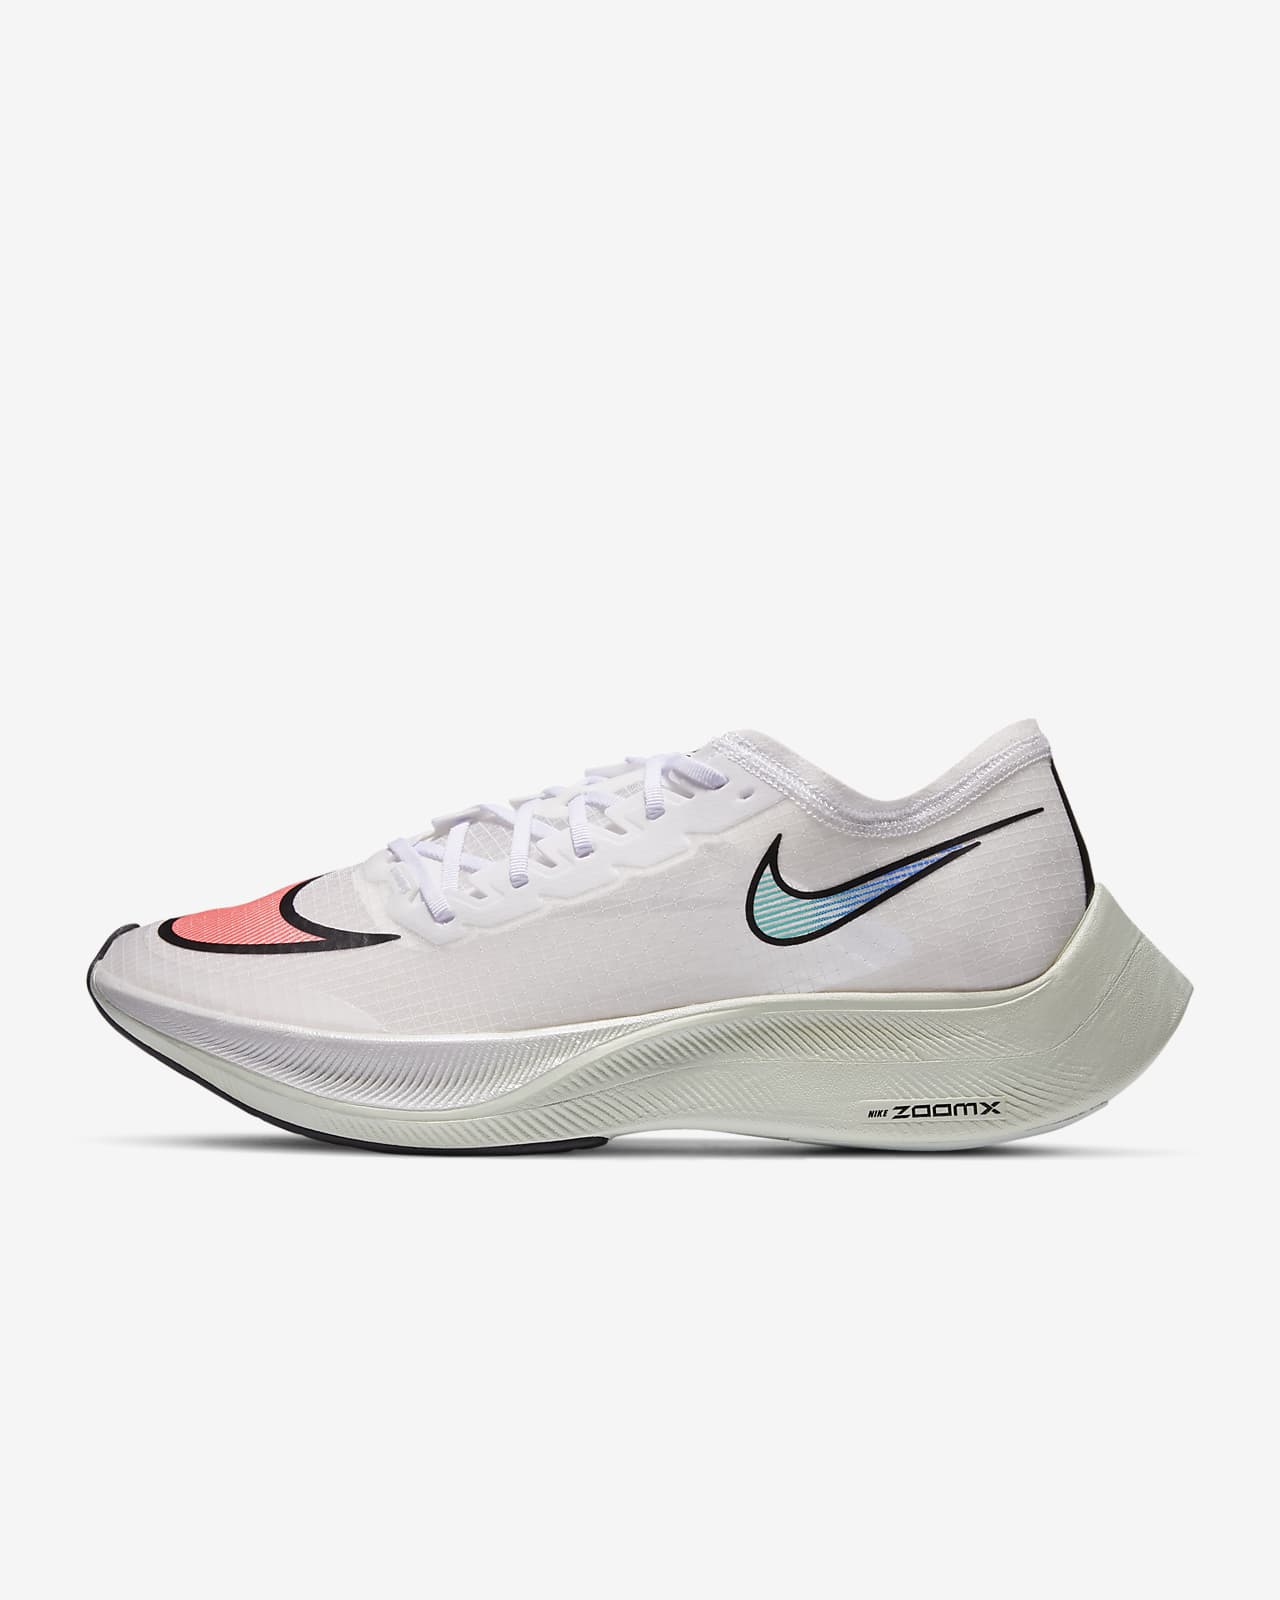 nike zoomx vaporfly running shoes